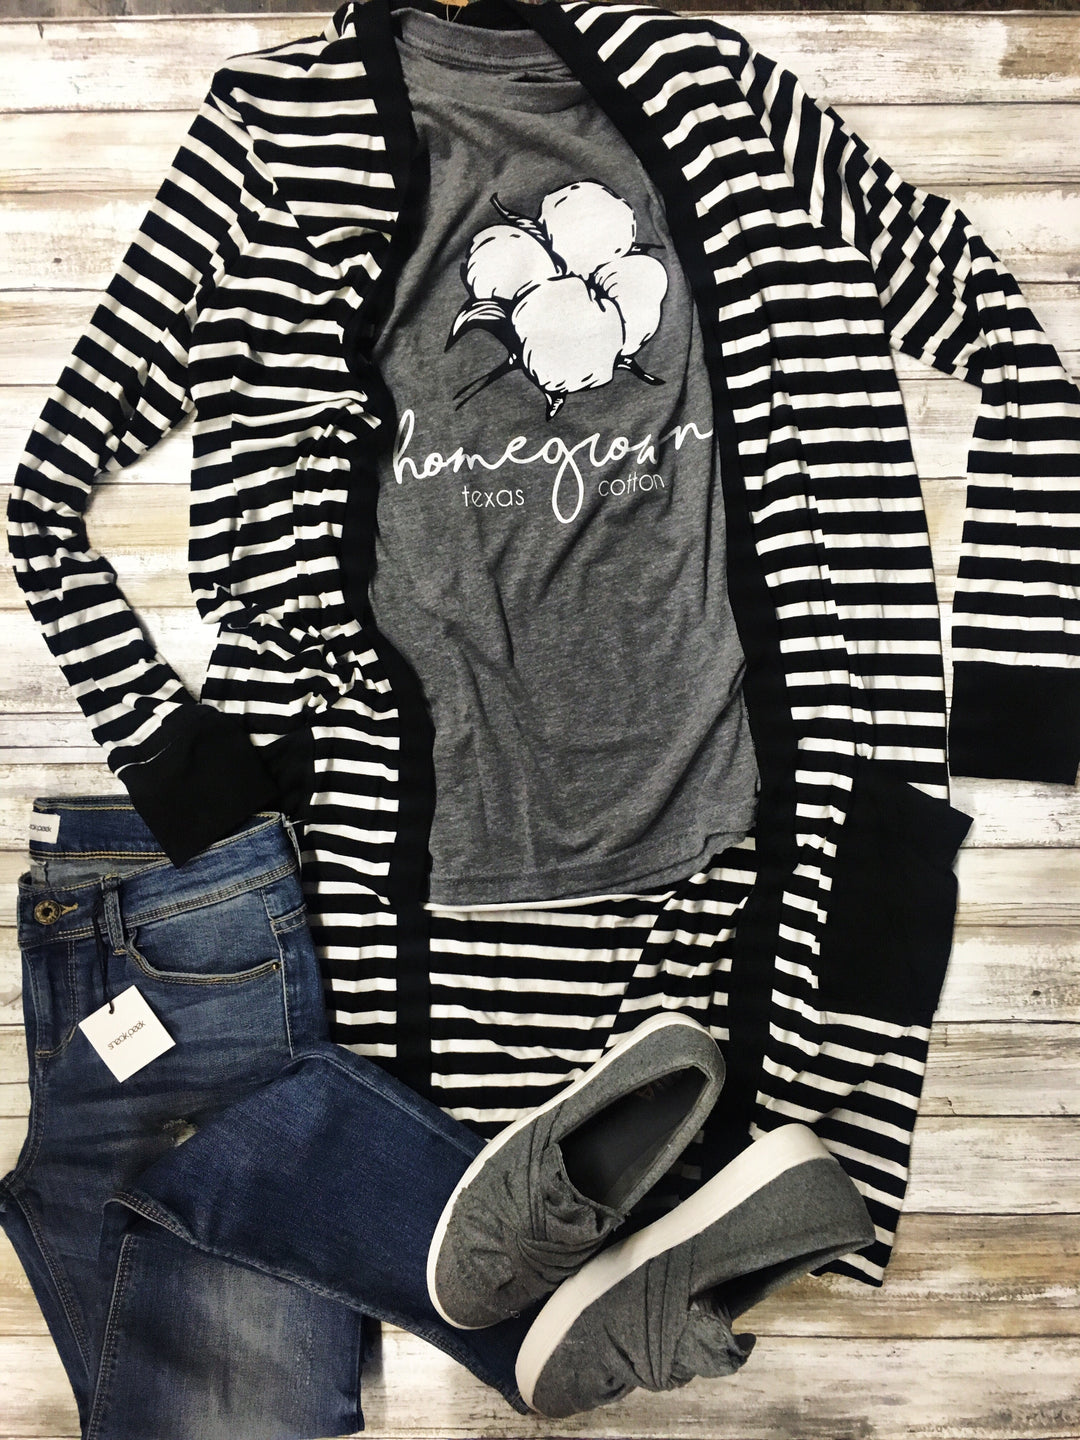 Home Grown Cotton Grey Short Sleeve Tee by Texas True Threads | Graphic Tees by Texas True Threads | horse-creek-boutique.